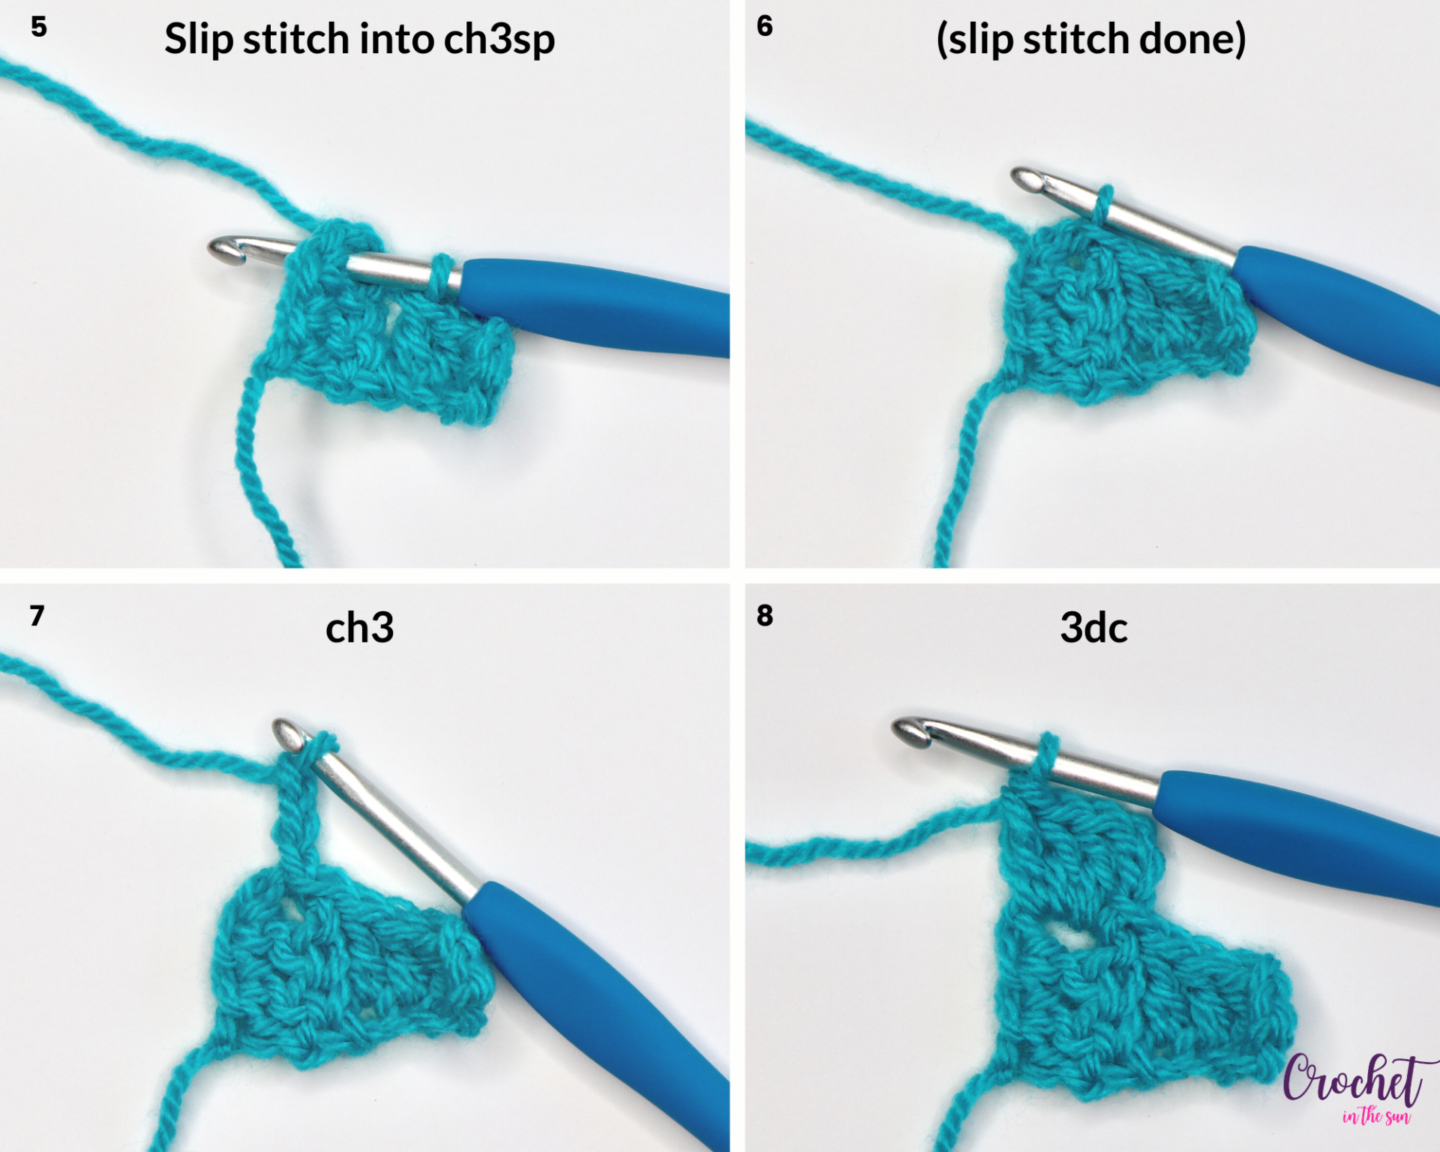 Learn how to corner to corner crochet (photo 3 of 5). This provides a clear, step-by-step photo tutorial for the c2c stitch (corner to corner stitch). This stitch is easy to learn and is beginner friendly. Learn how to crochet! There are so many c2c project ideas you will be able to complete!